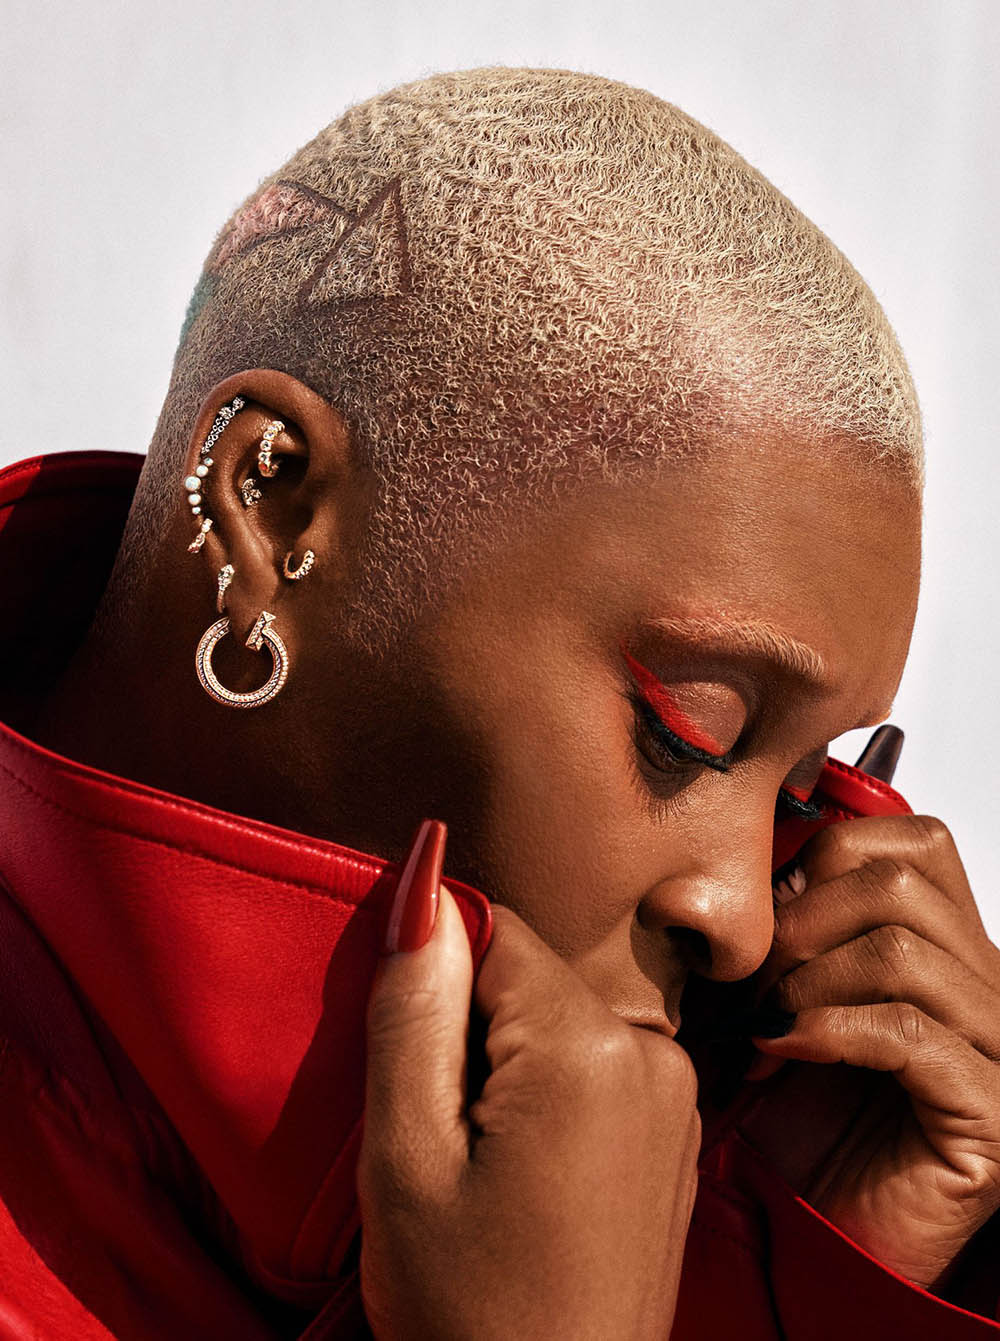 Cynthia Erivo covers InStyle US October 2020 by Joshua Kissi